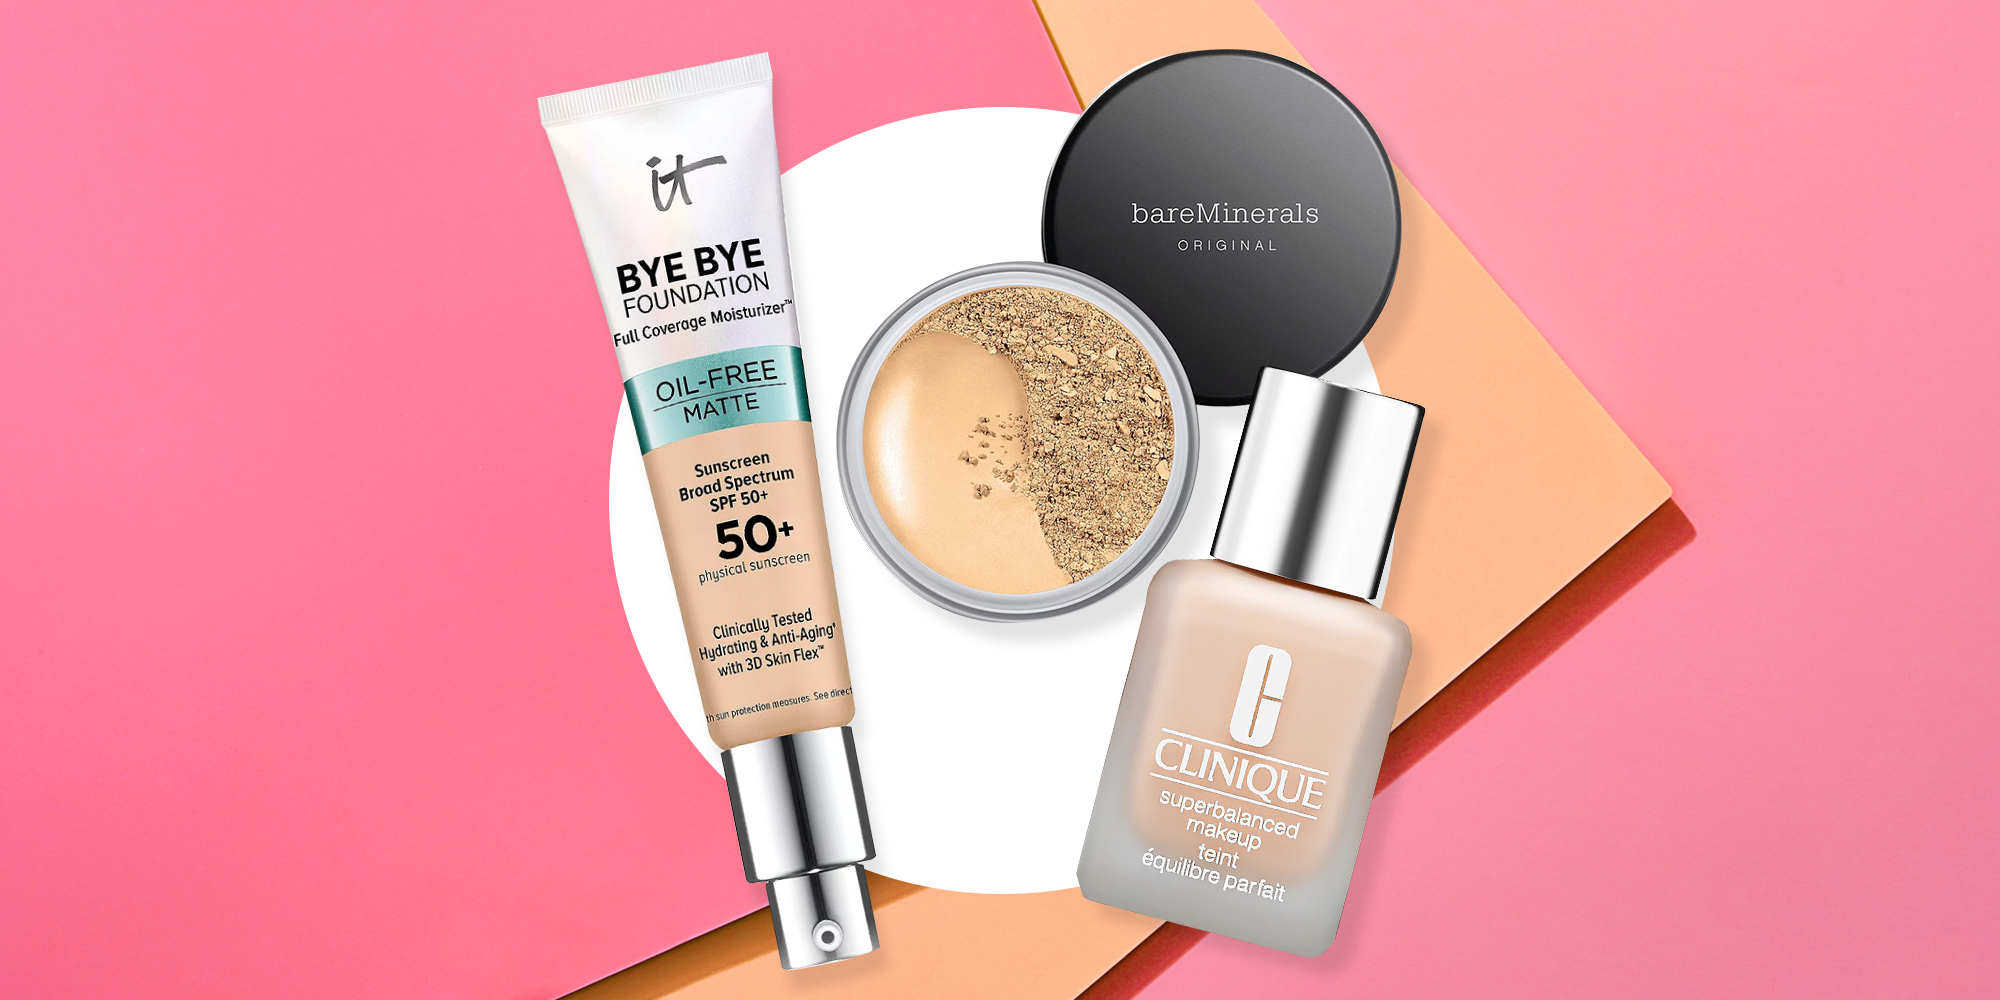 is matte foundation best for oily skin